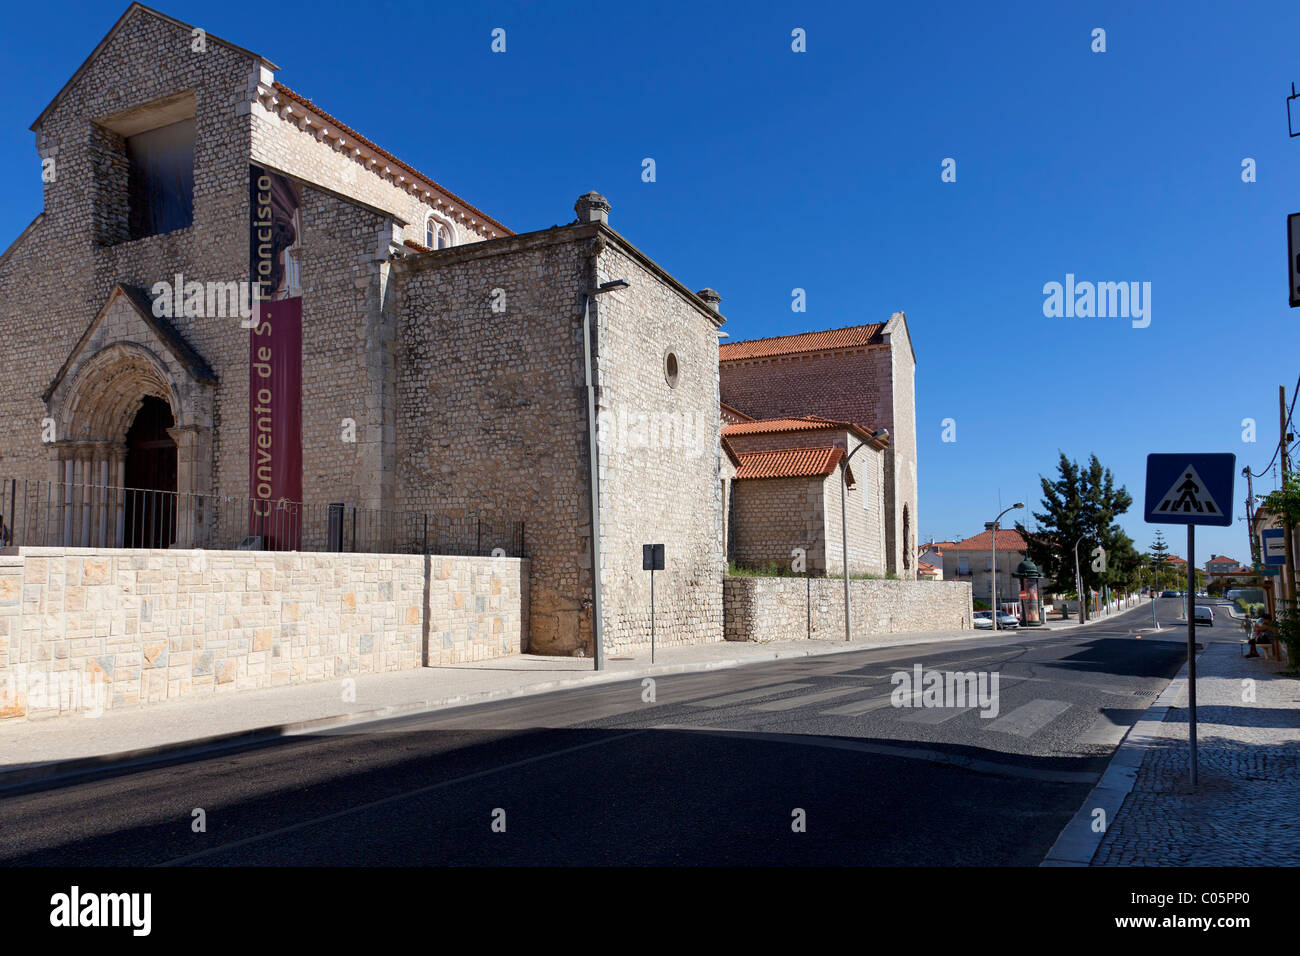 São Francisco Convent in the city of Santarém, Portugal. 13th century Mendicant Gothic Architecture. Franciscan Religious Order. Stock Photo